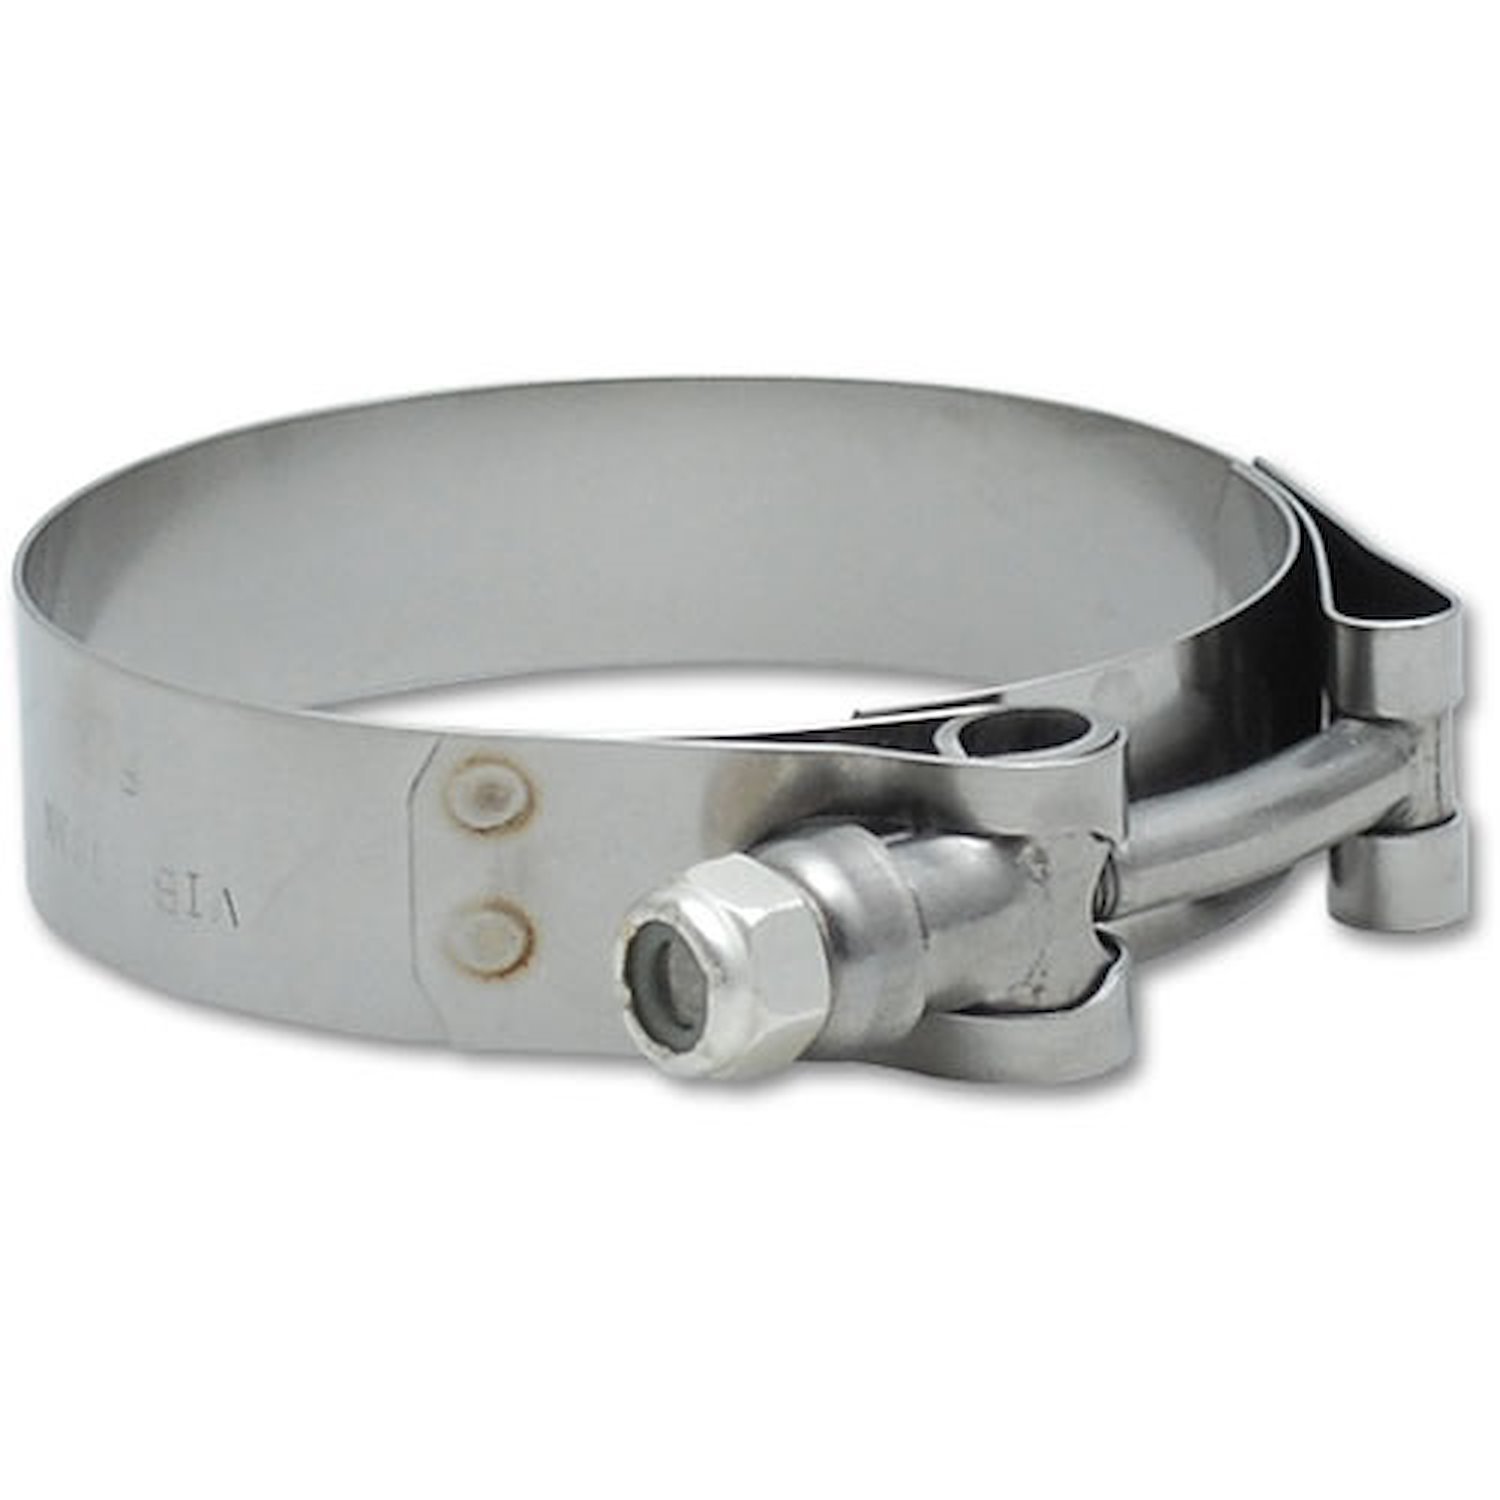 Stainless Steel T-Bolt Clamps Clamp Range 2.27" - 2.63"